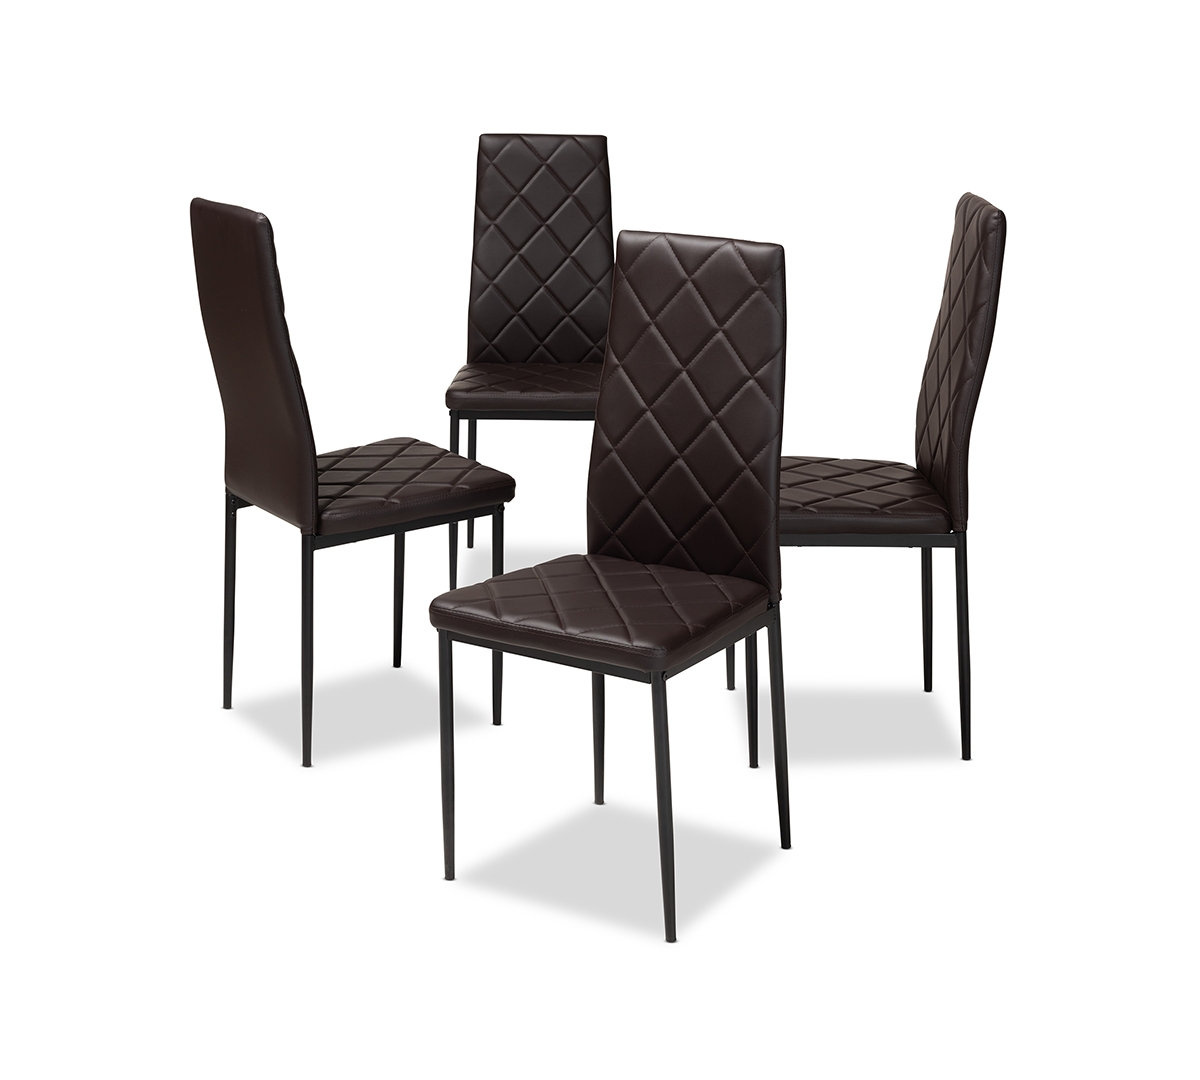 Blaise Dining Chair (Set Of 4)